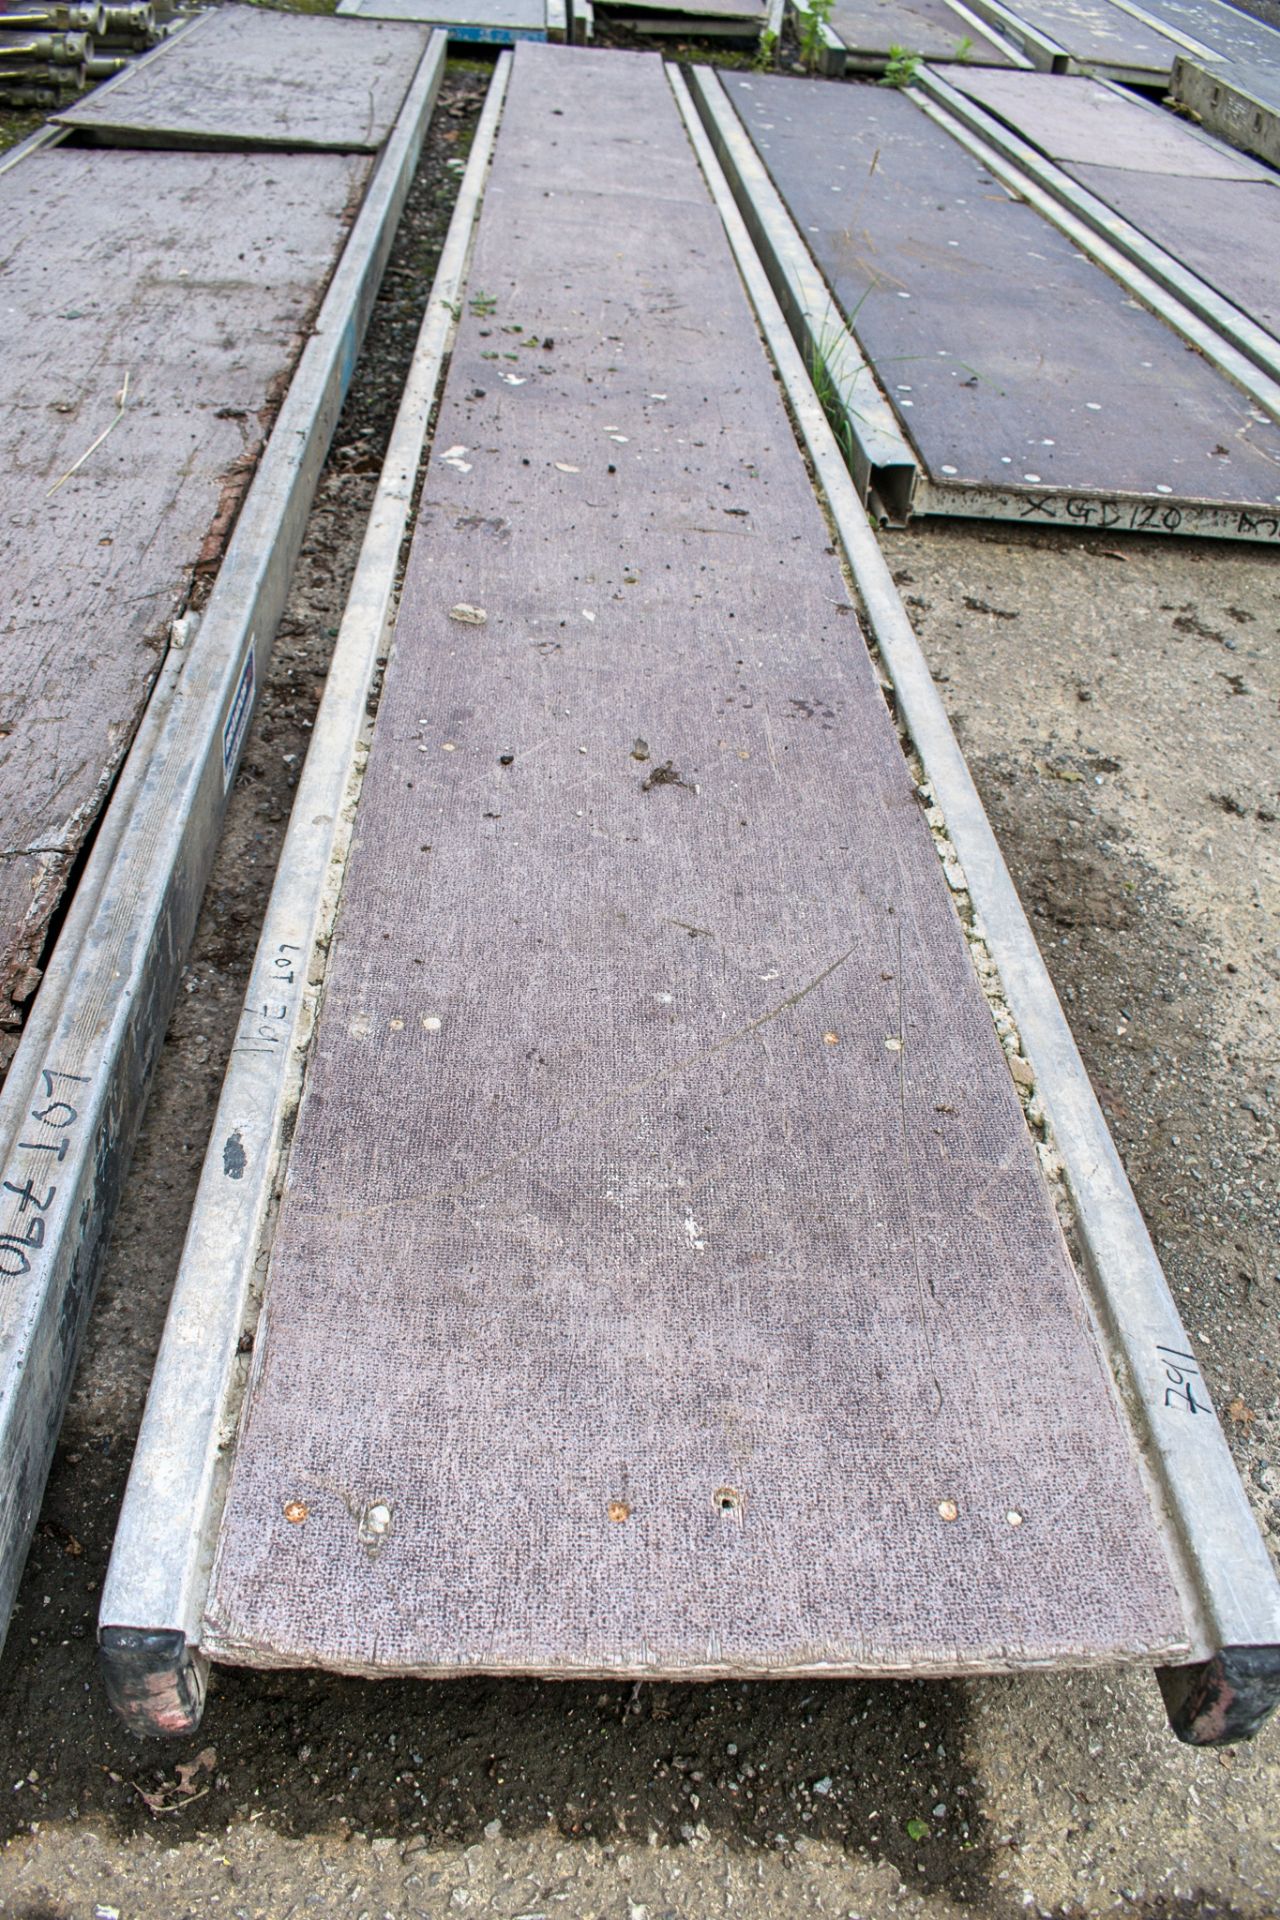 Aluminium staging board approximately 14 ft long